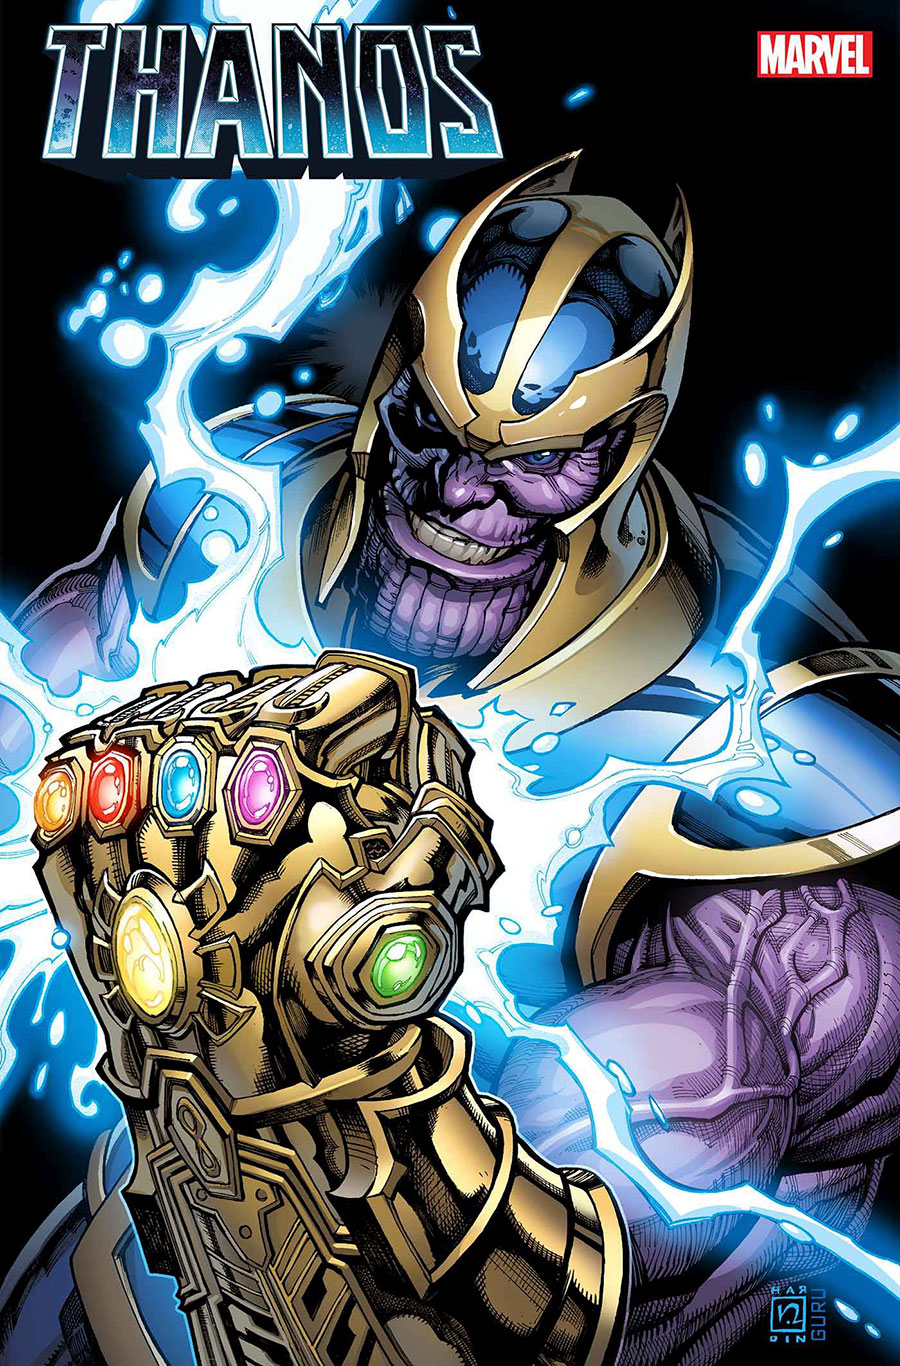 Thanos Vol 4 Annual #1 (One Shot) Cover F Variant Chad Hardin Foil Cover (Infinity Watch Part 1)